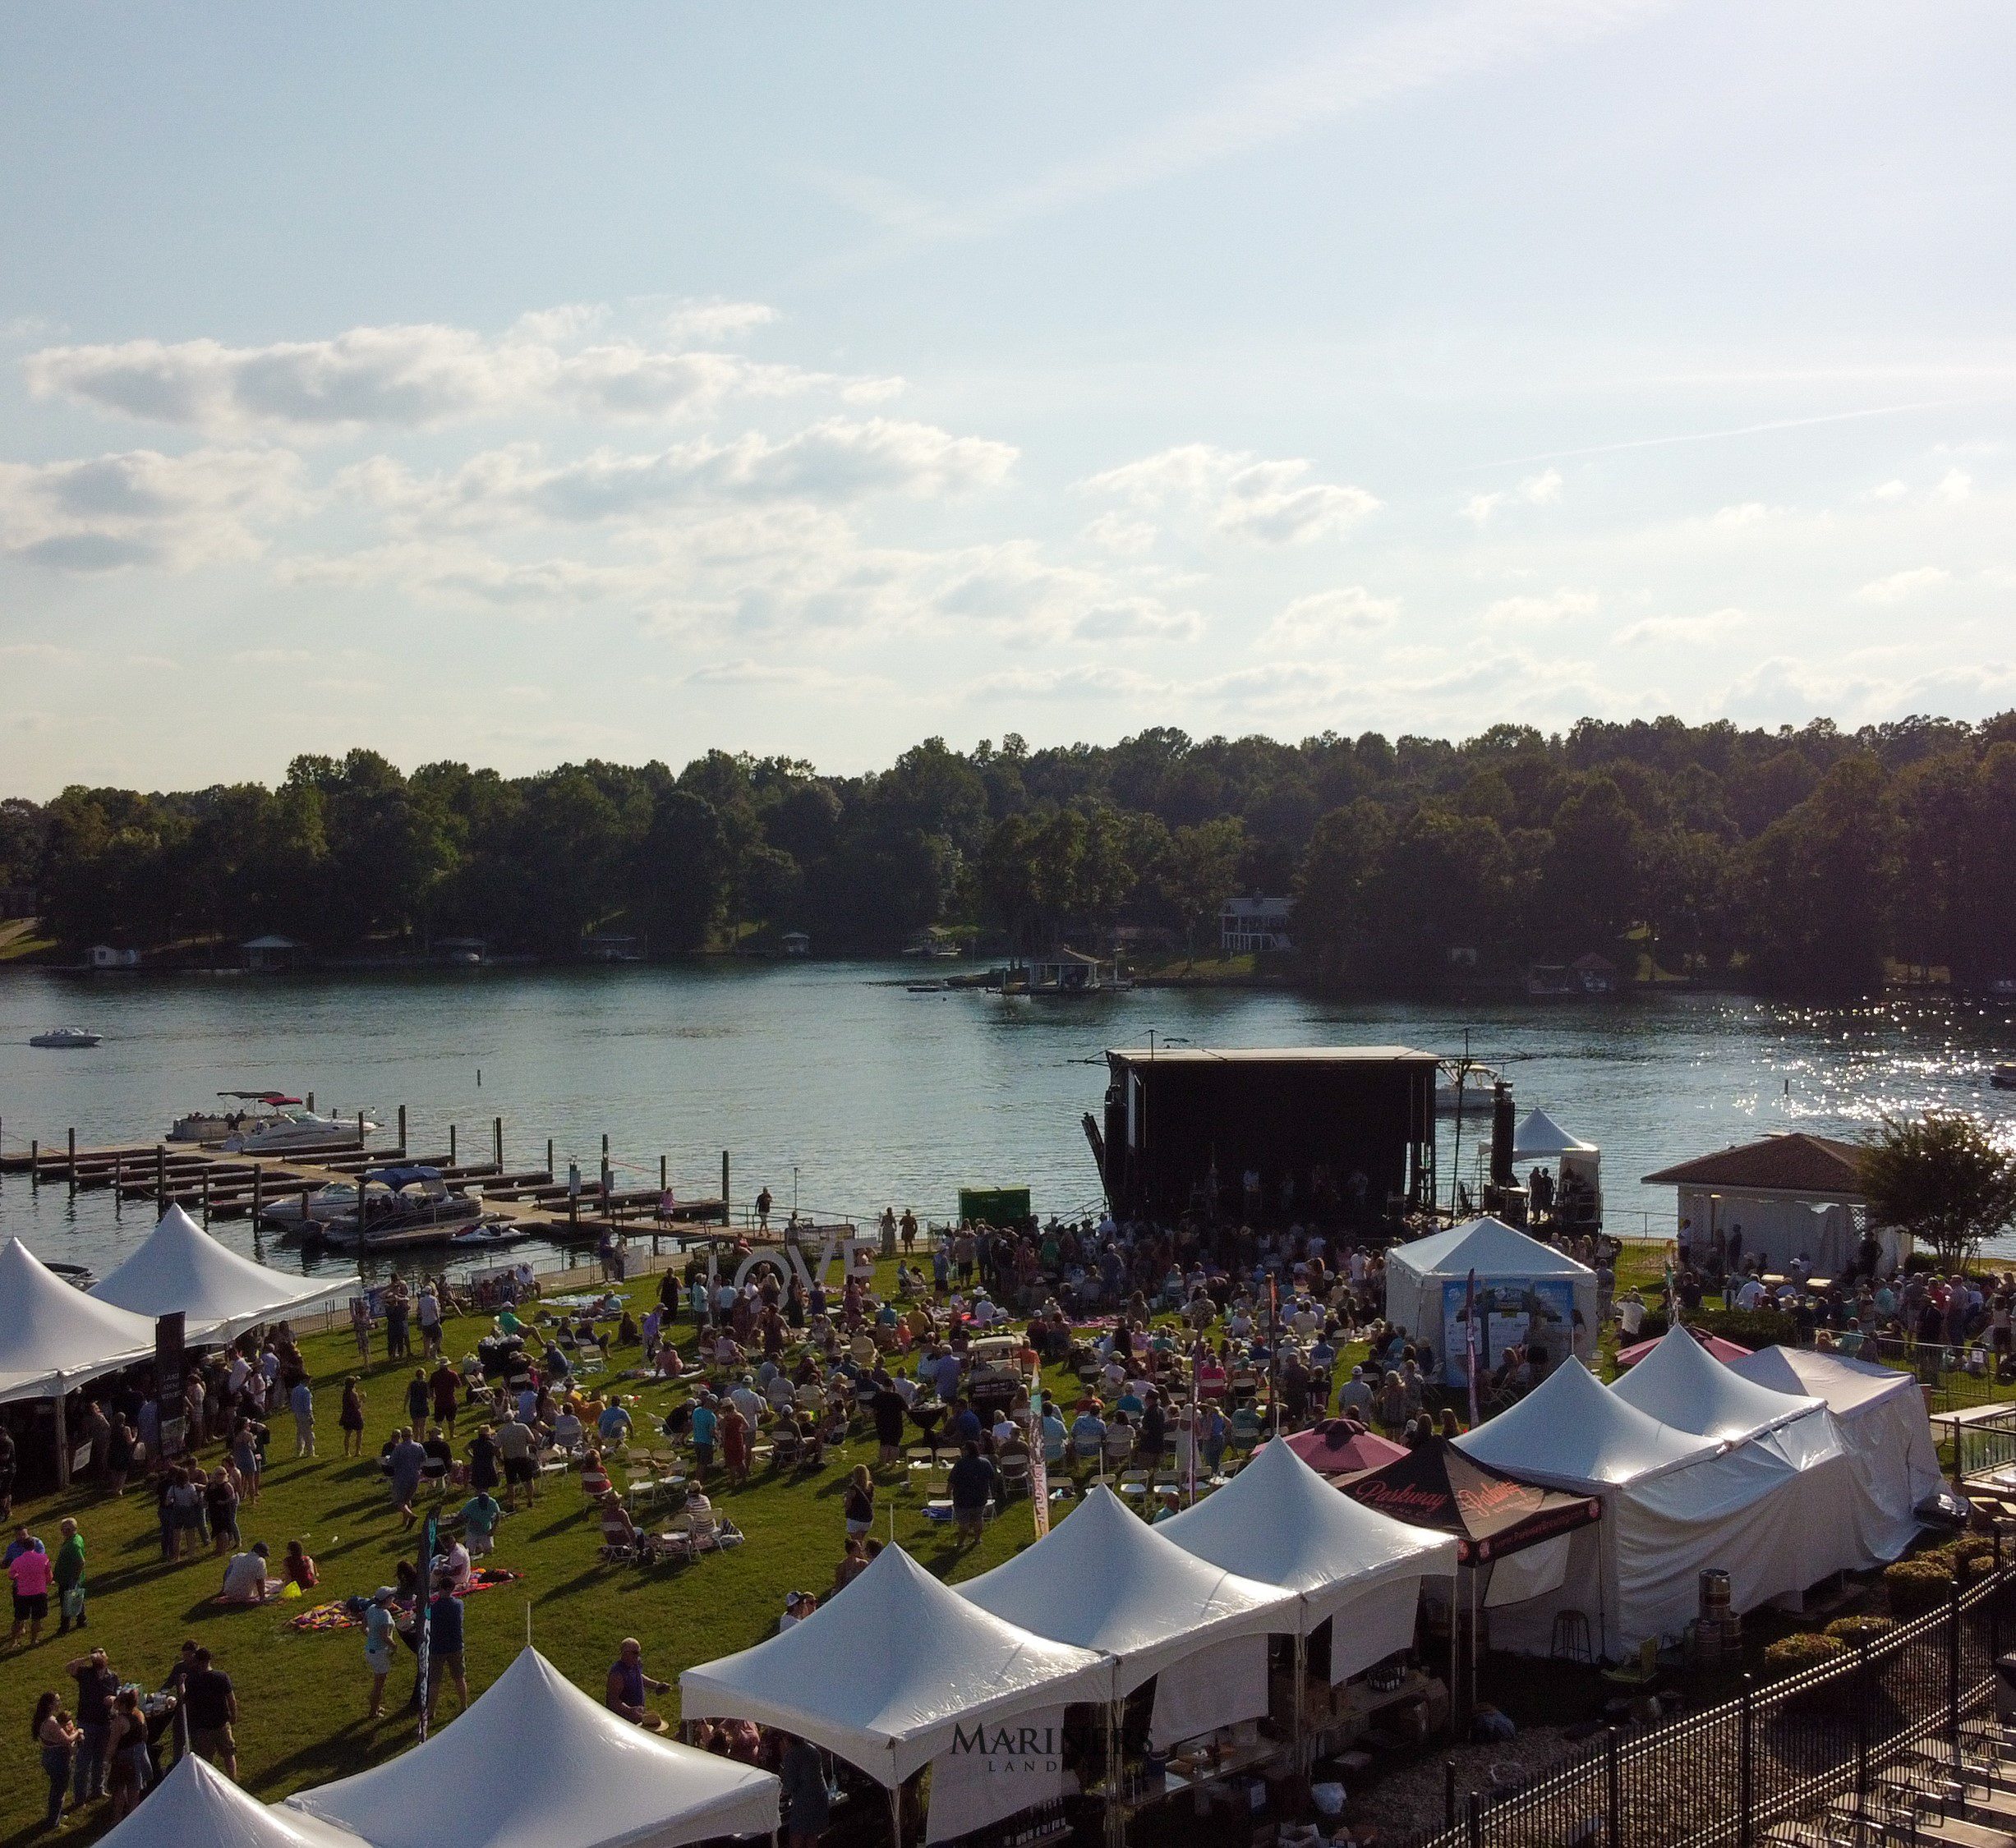 The 2022 SML Wine Festival at Mariners Landing